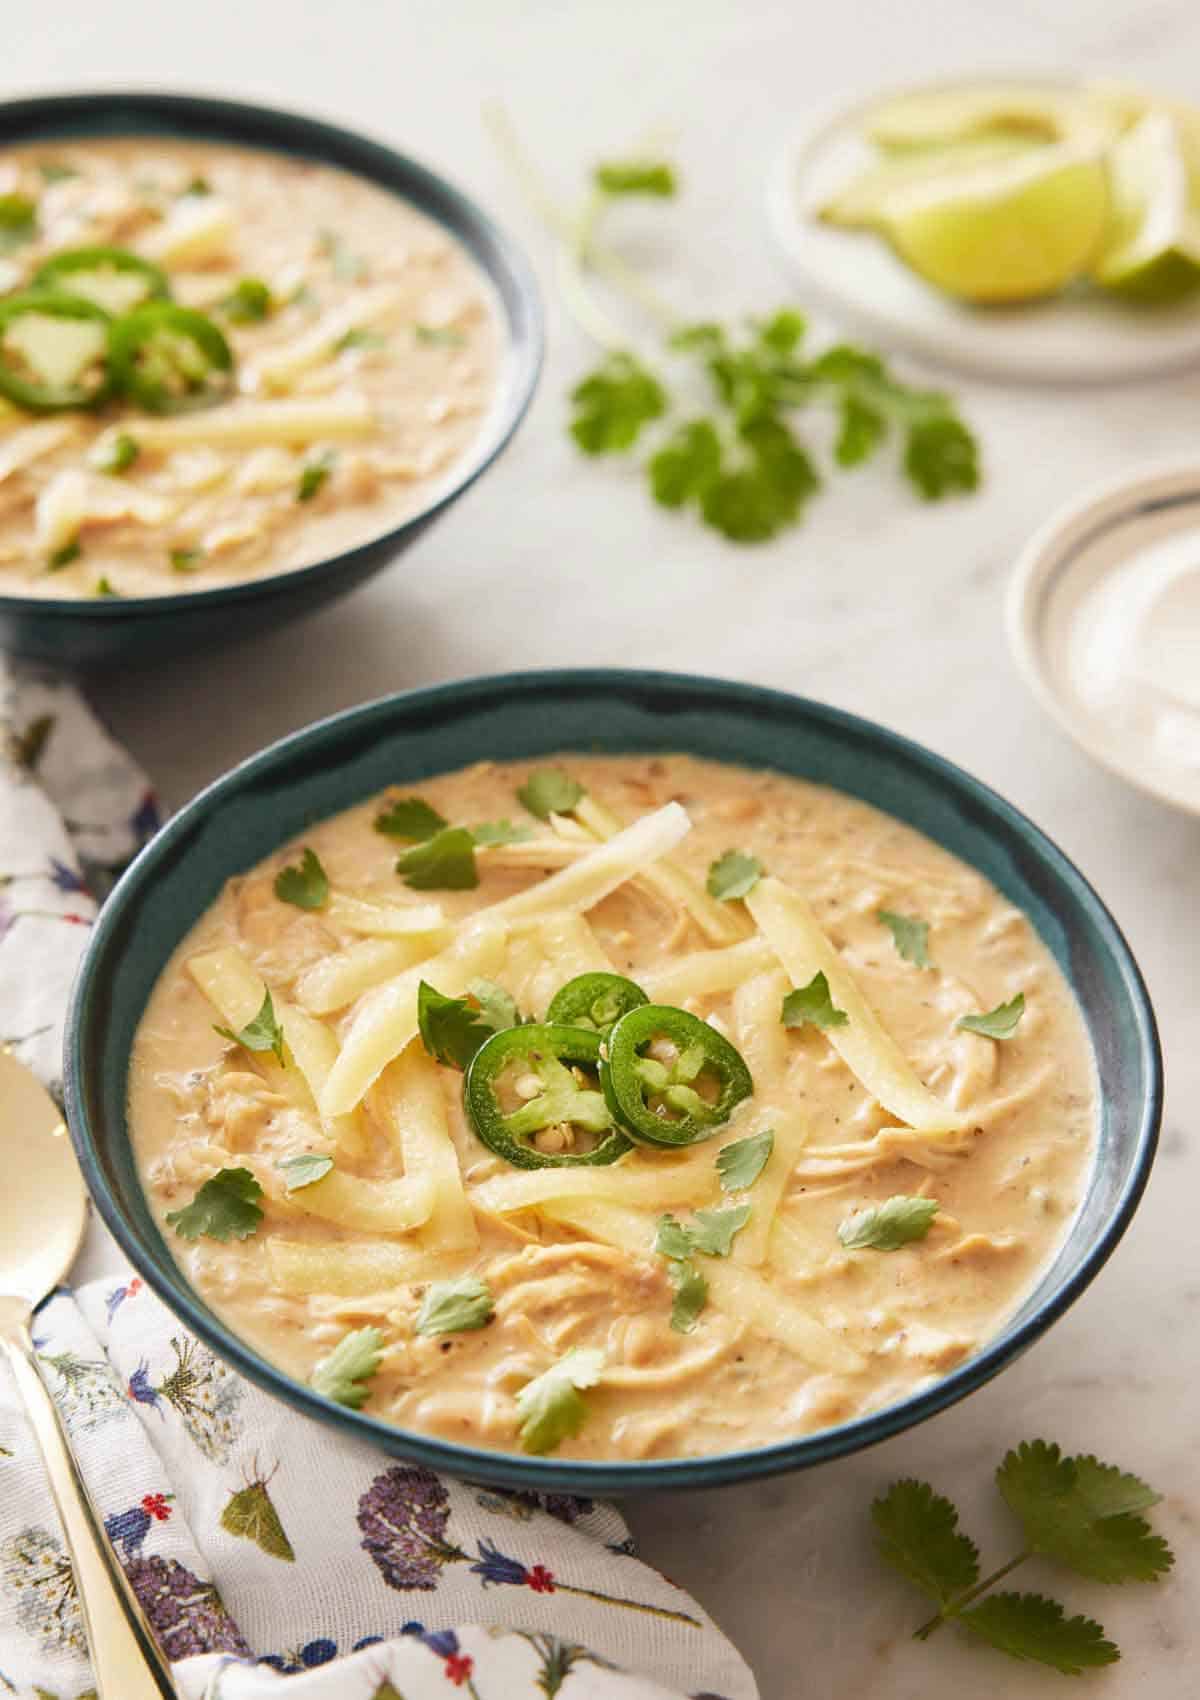 A bowl of white chicken chili with sliced jalapeno and shredded cheese on top.